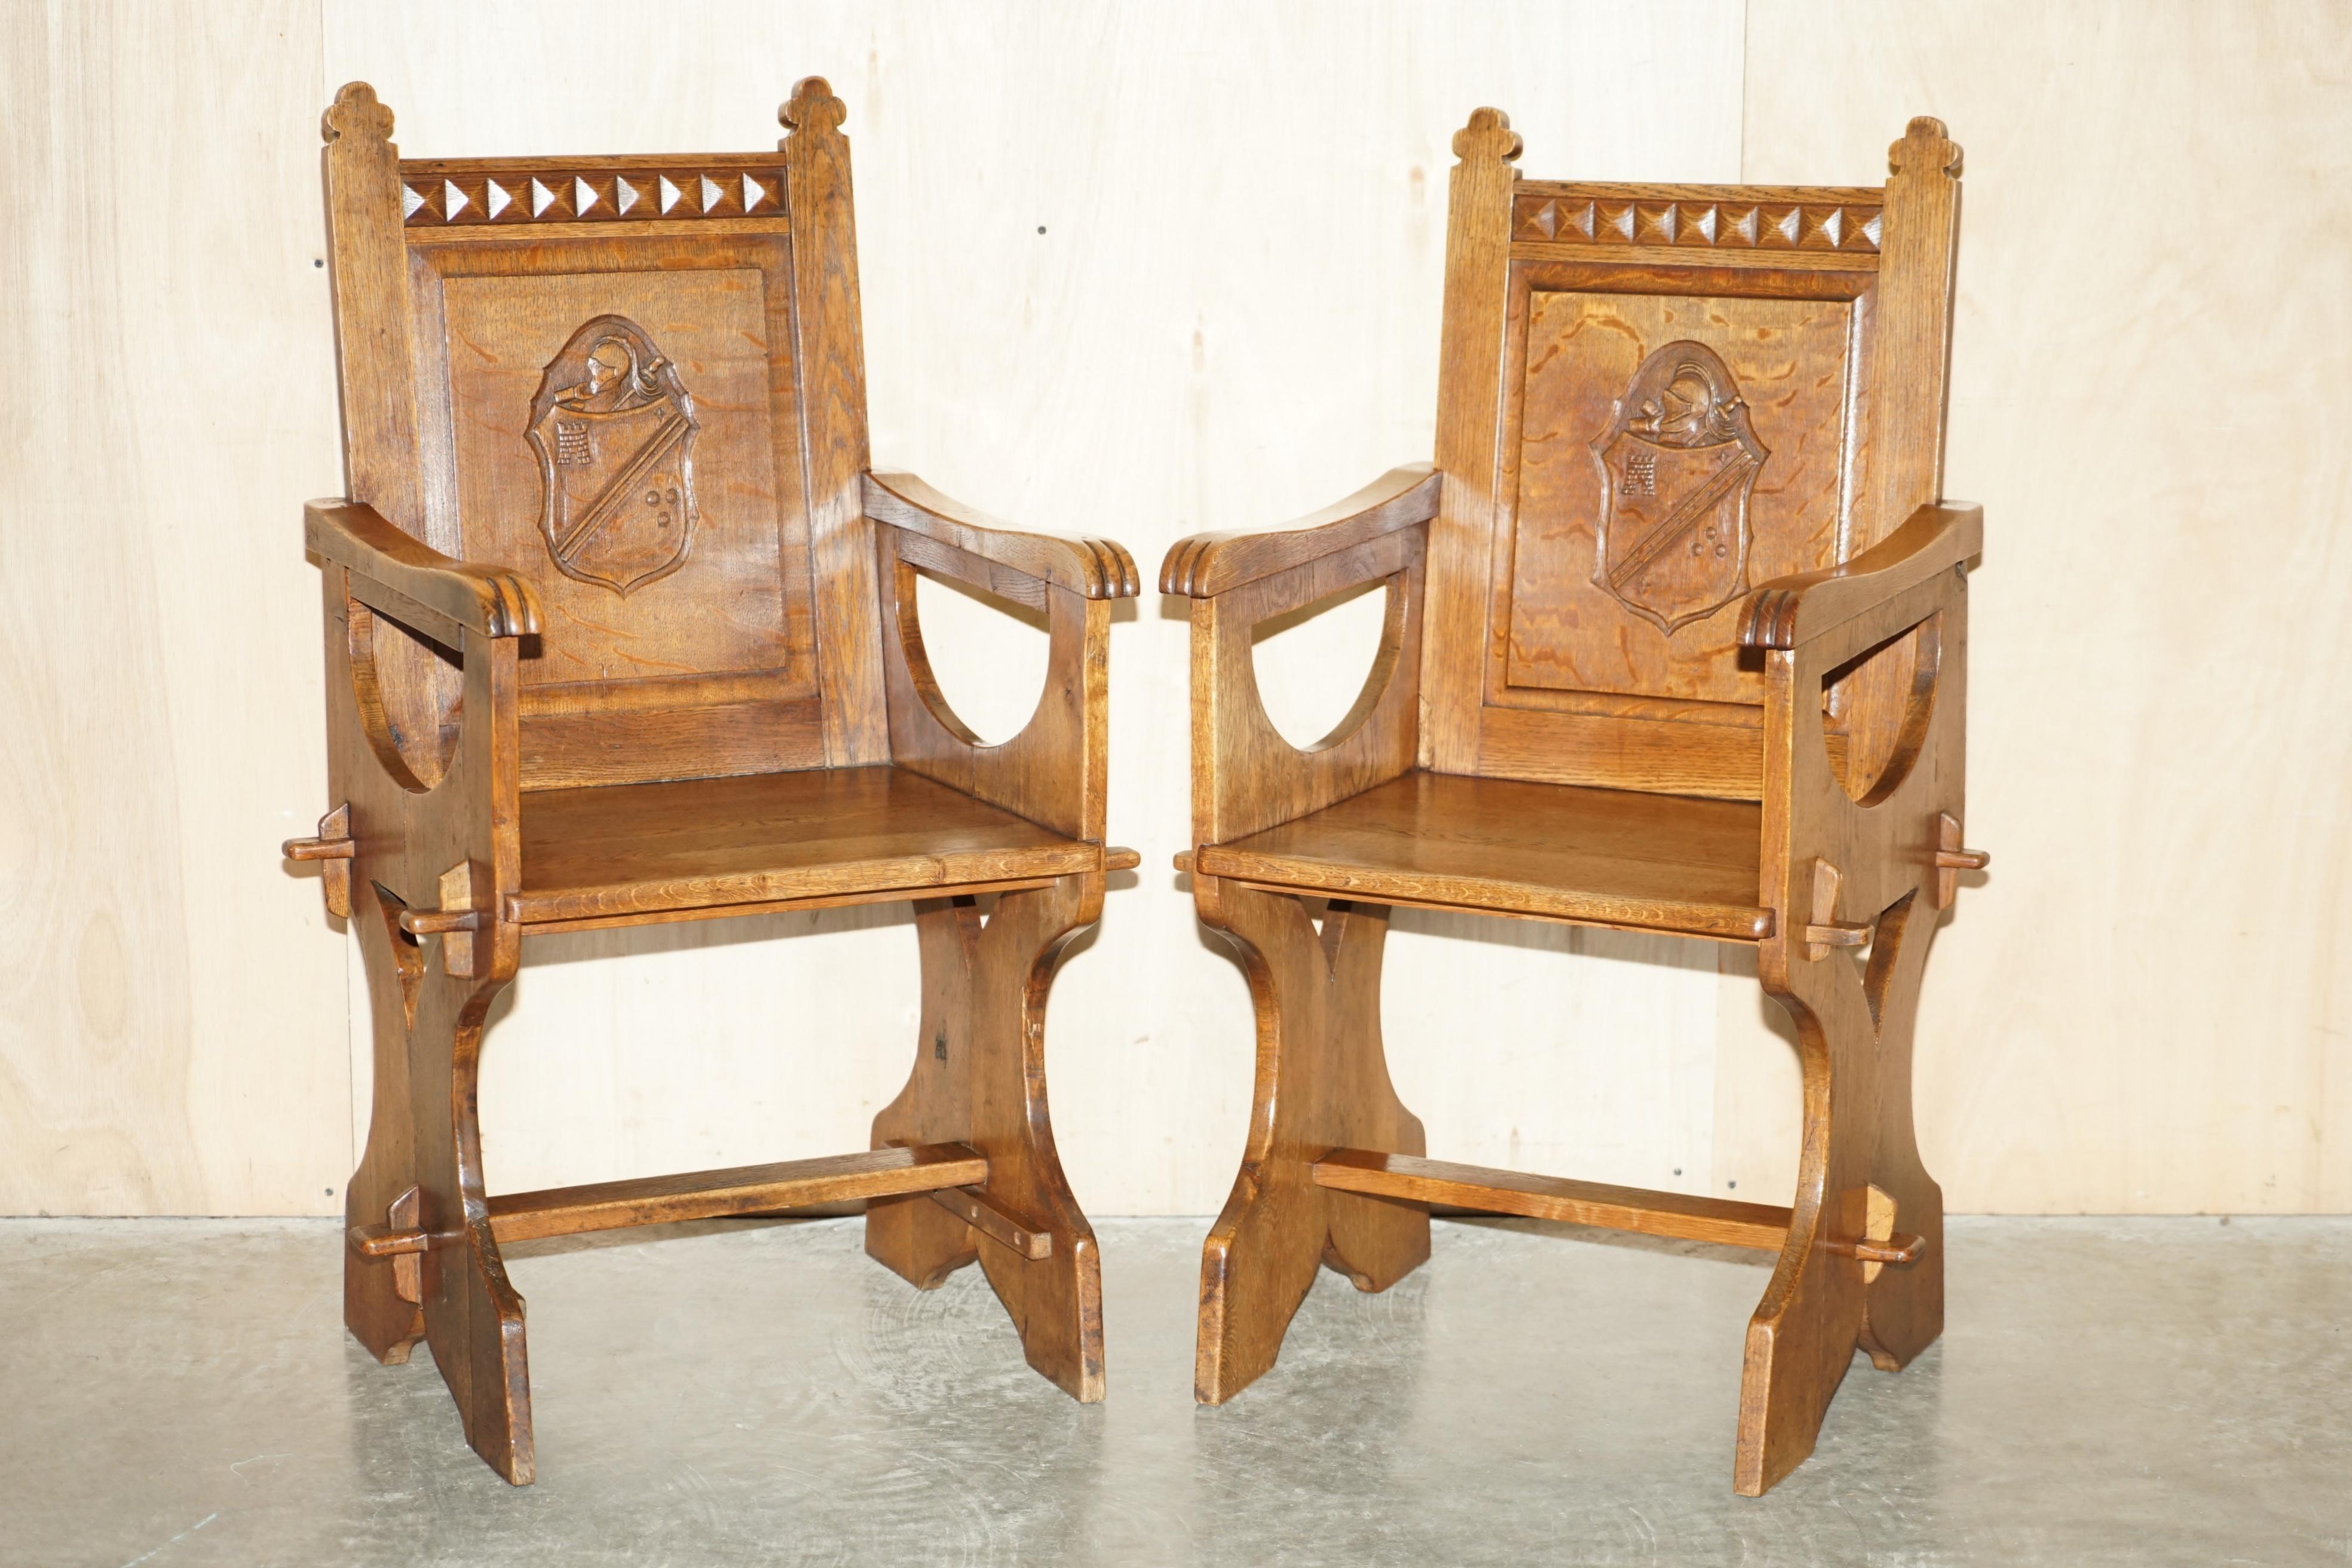 We are delighted to offer for sale this stunning pair of antique English oak hand carved chairs with Armorial coat of arms to the backrests 

A good early original pair, hand carved, nicely executed, they are rare to find with armorial coats of